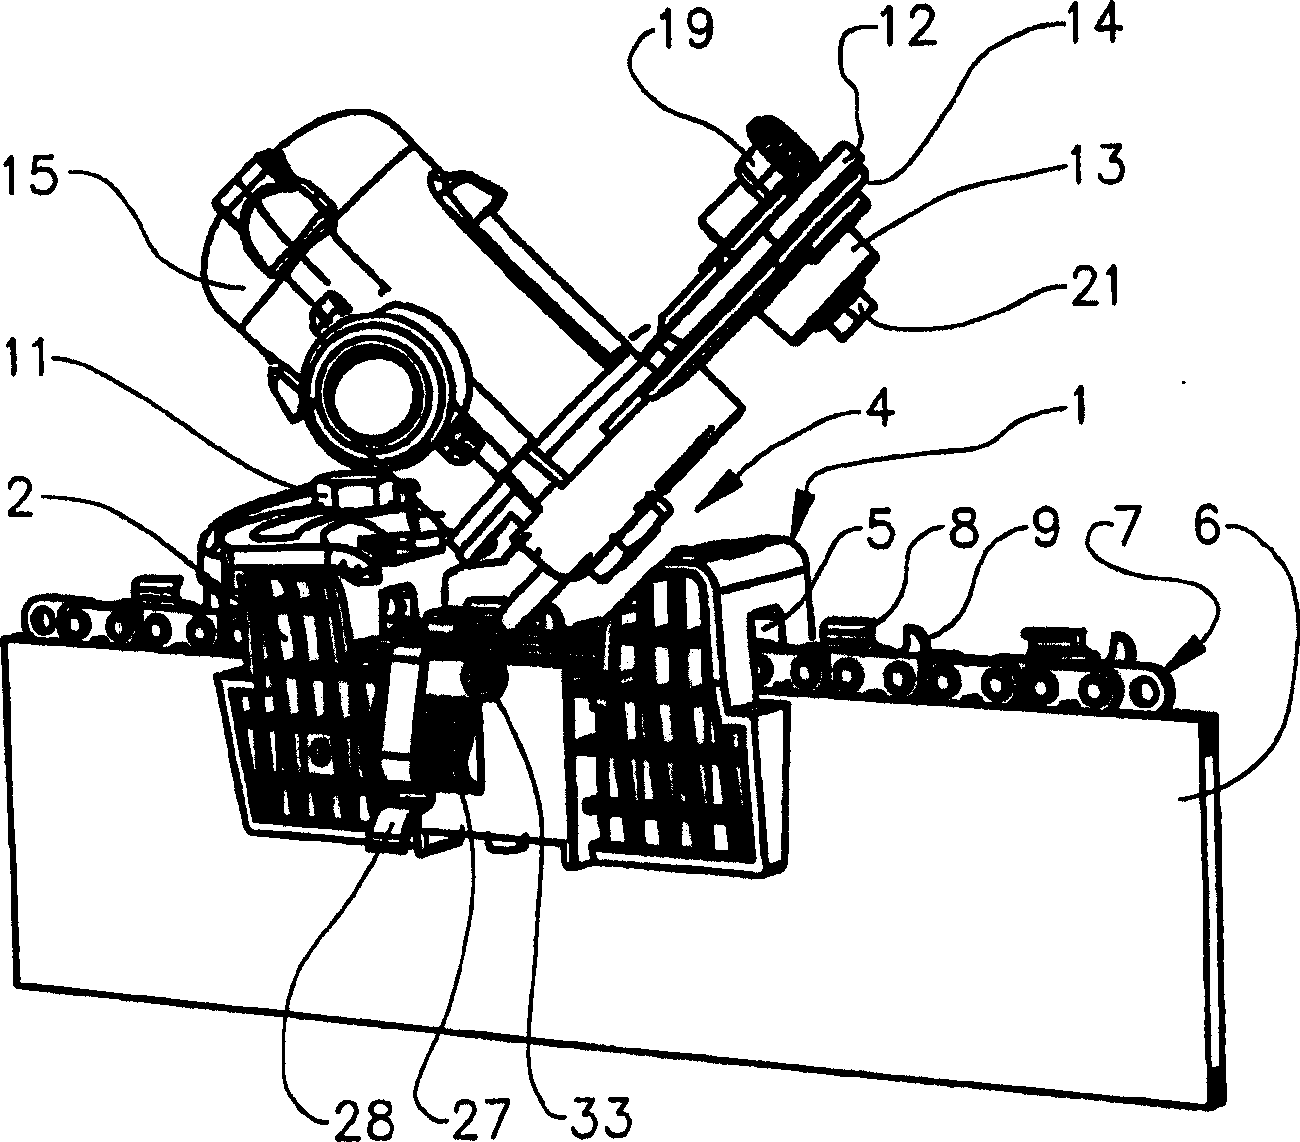 Device for sharpening chain saw teeth